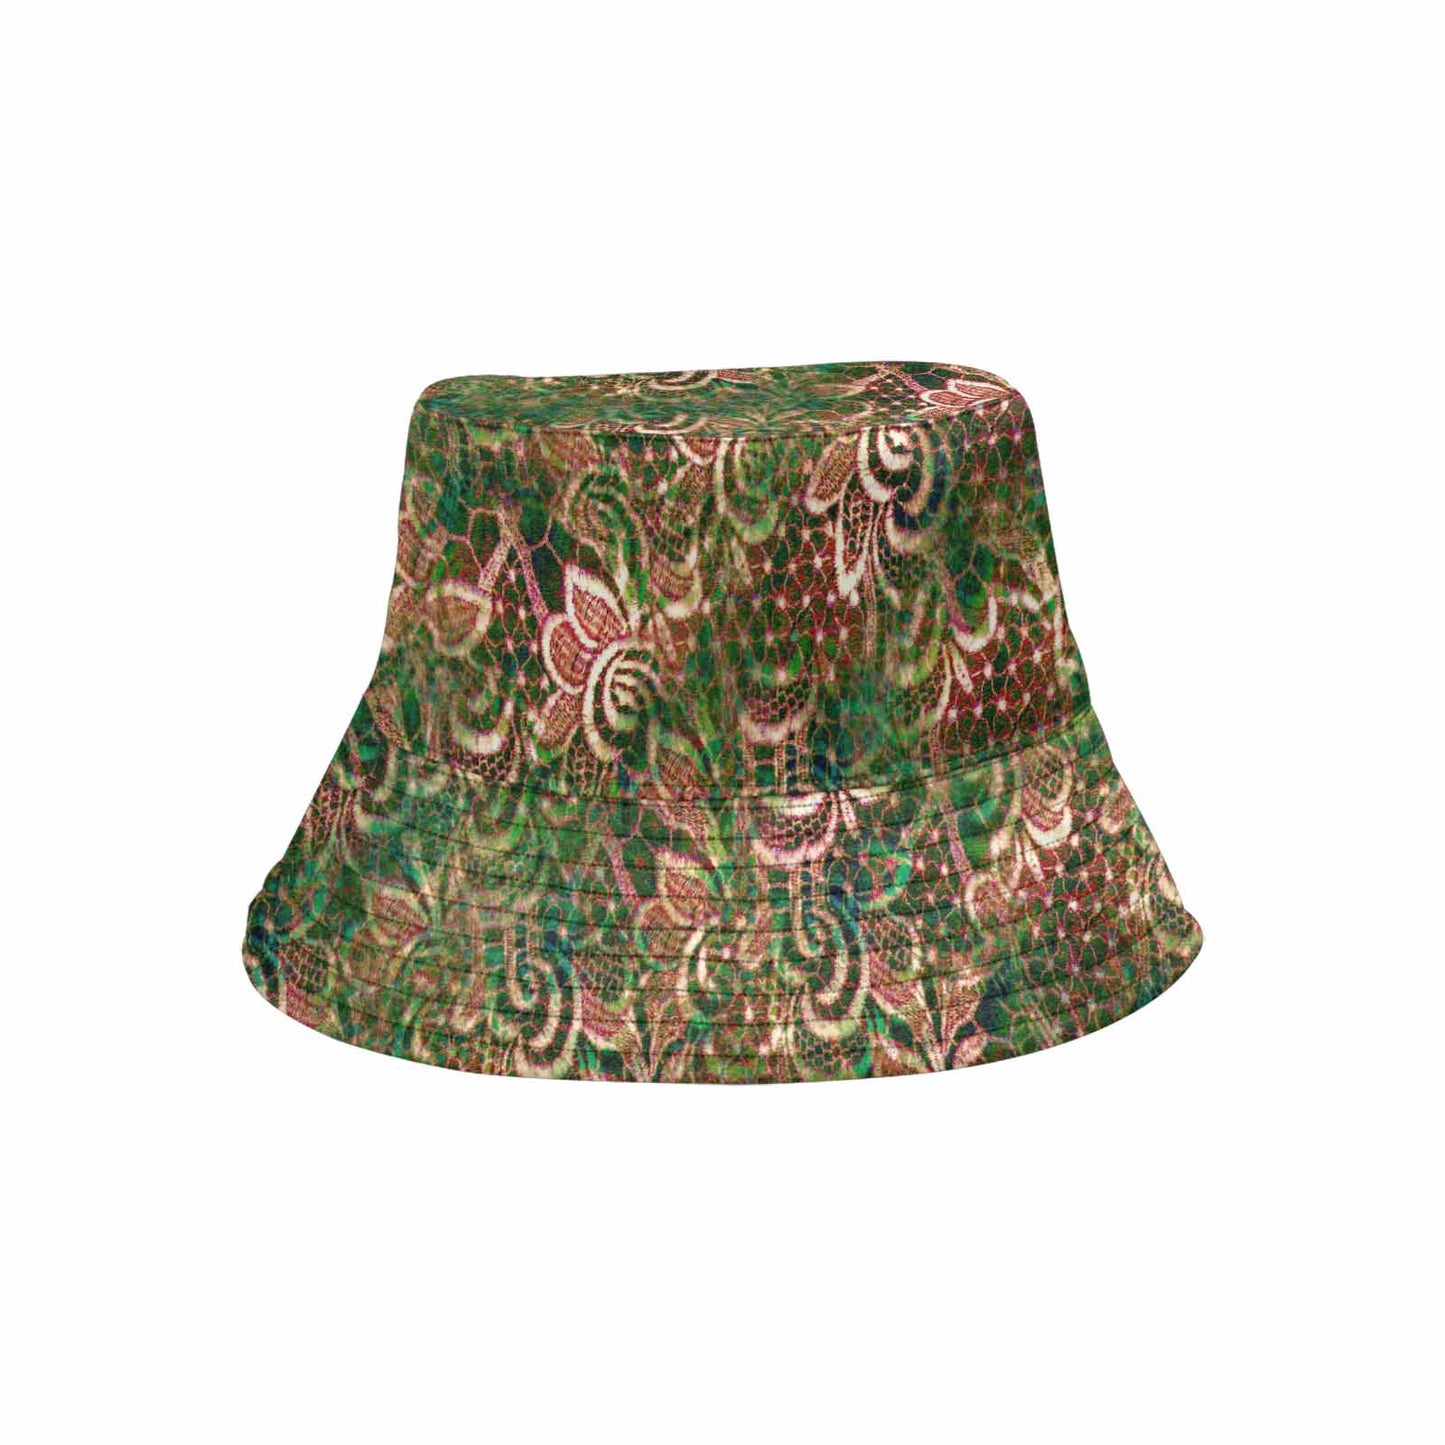 Victorian lace Bucket Hat, outdoors hat, design 34